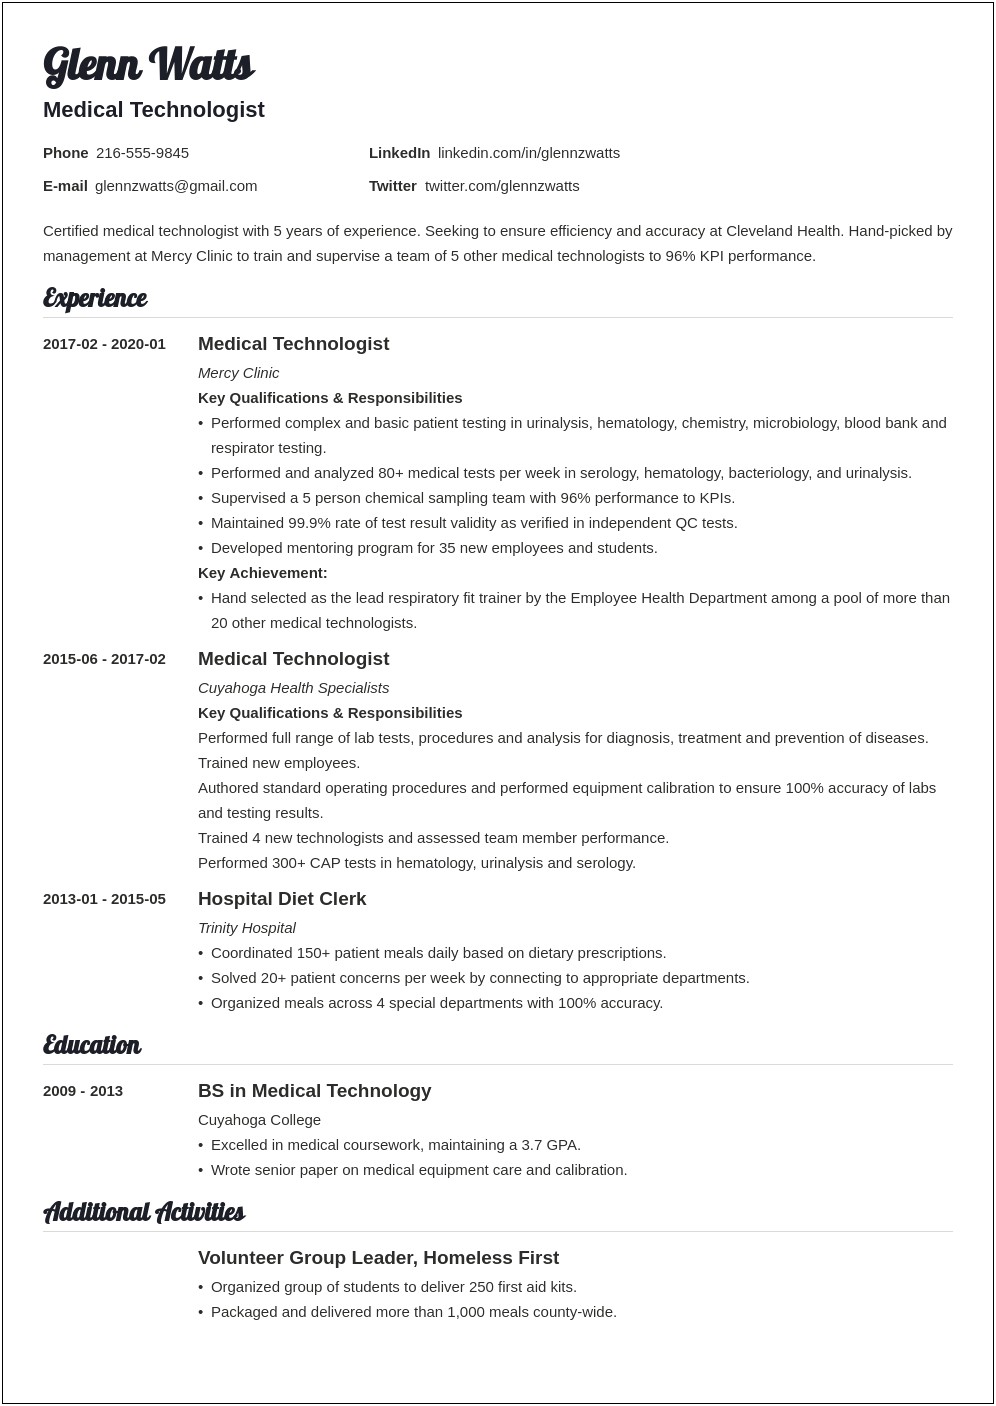 Medical Laboratory Scientist Resume With No Experience